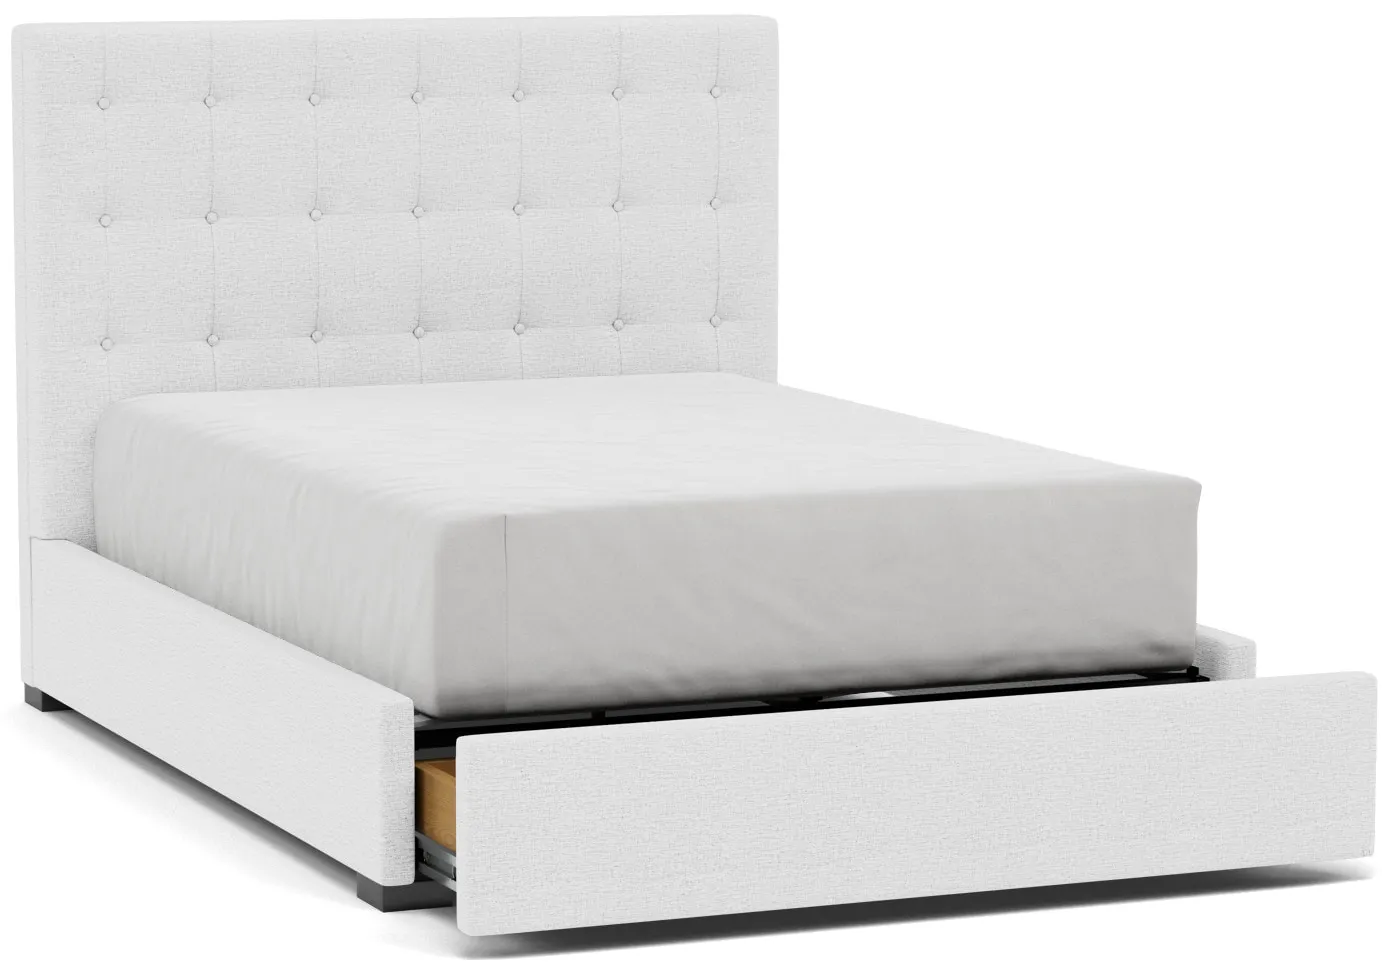 Abby Queen Upholstered Storage Bed in Tech Pebble